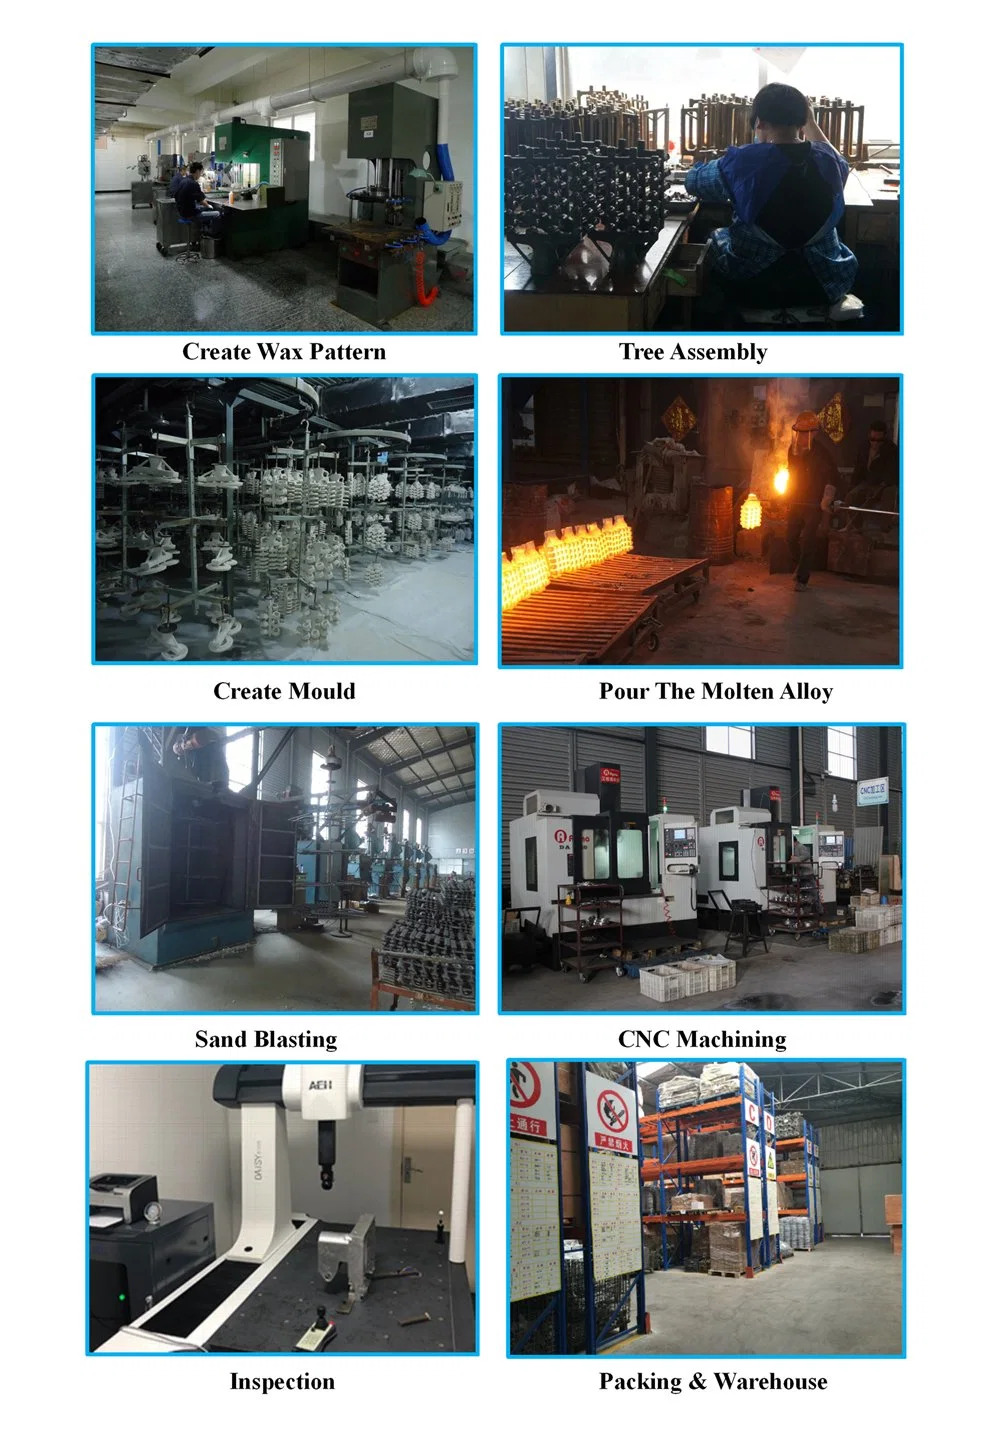 OEM Lost Wax Investment Casting Stainless Steel for Construction Hardware